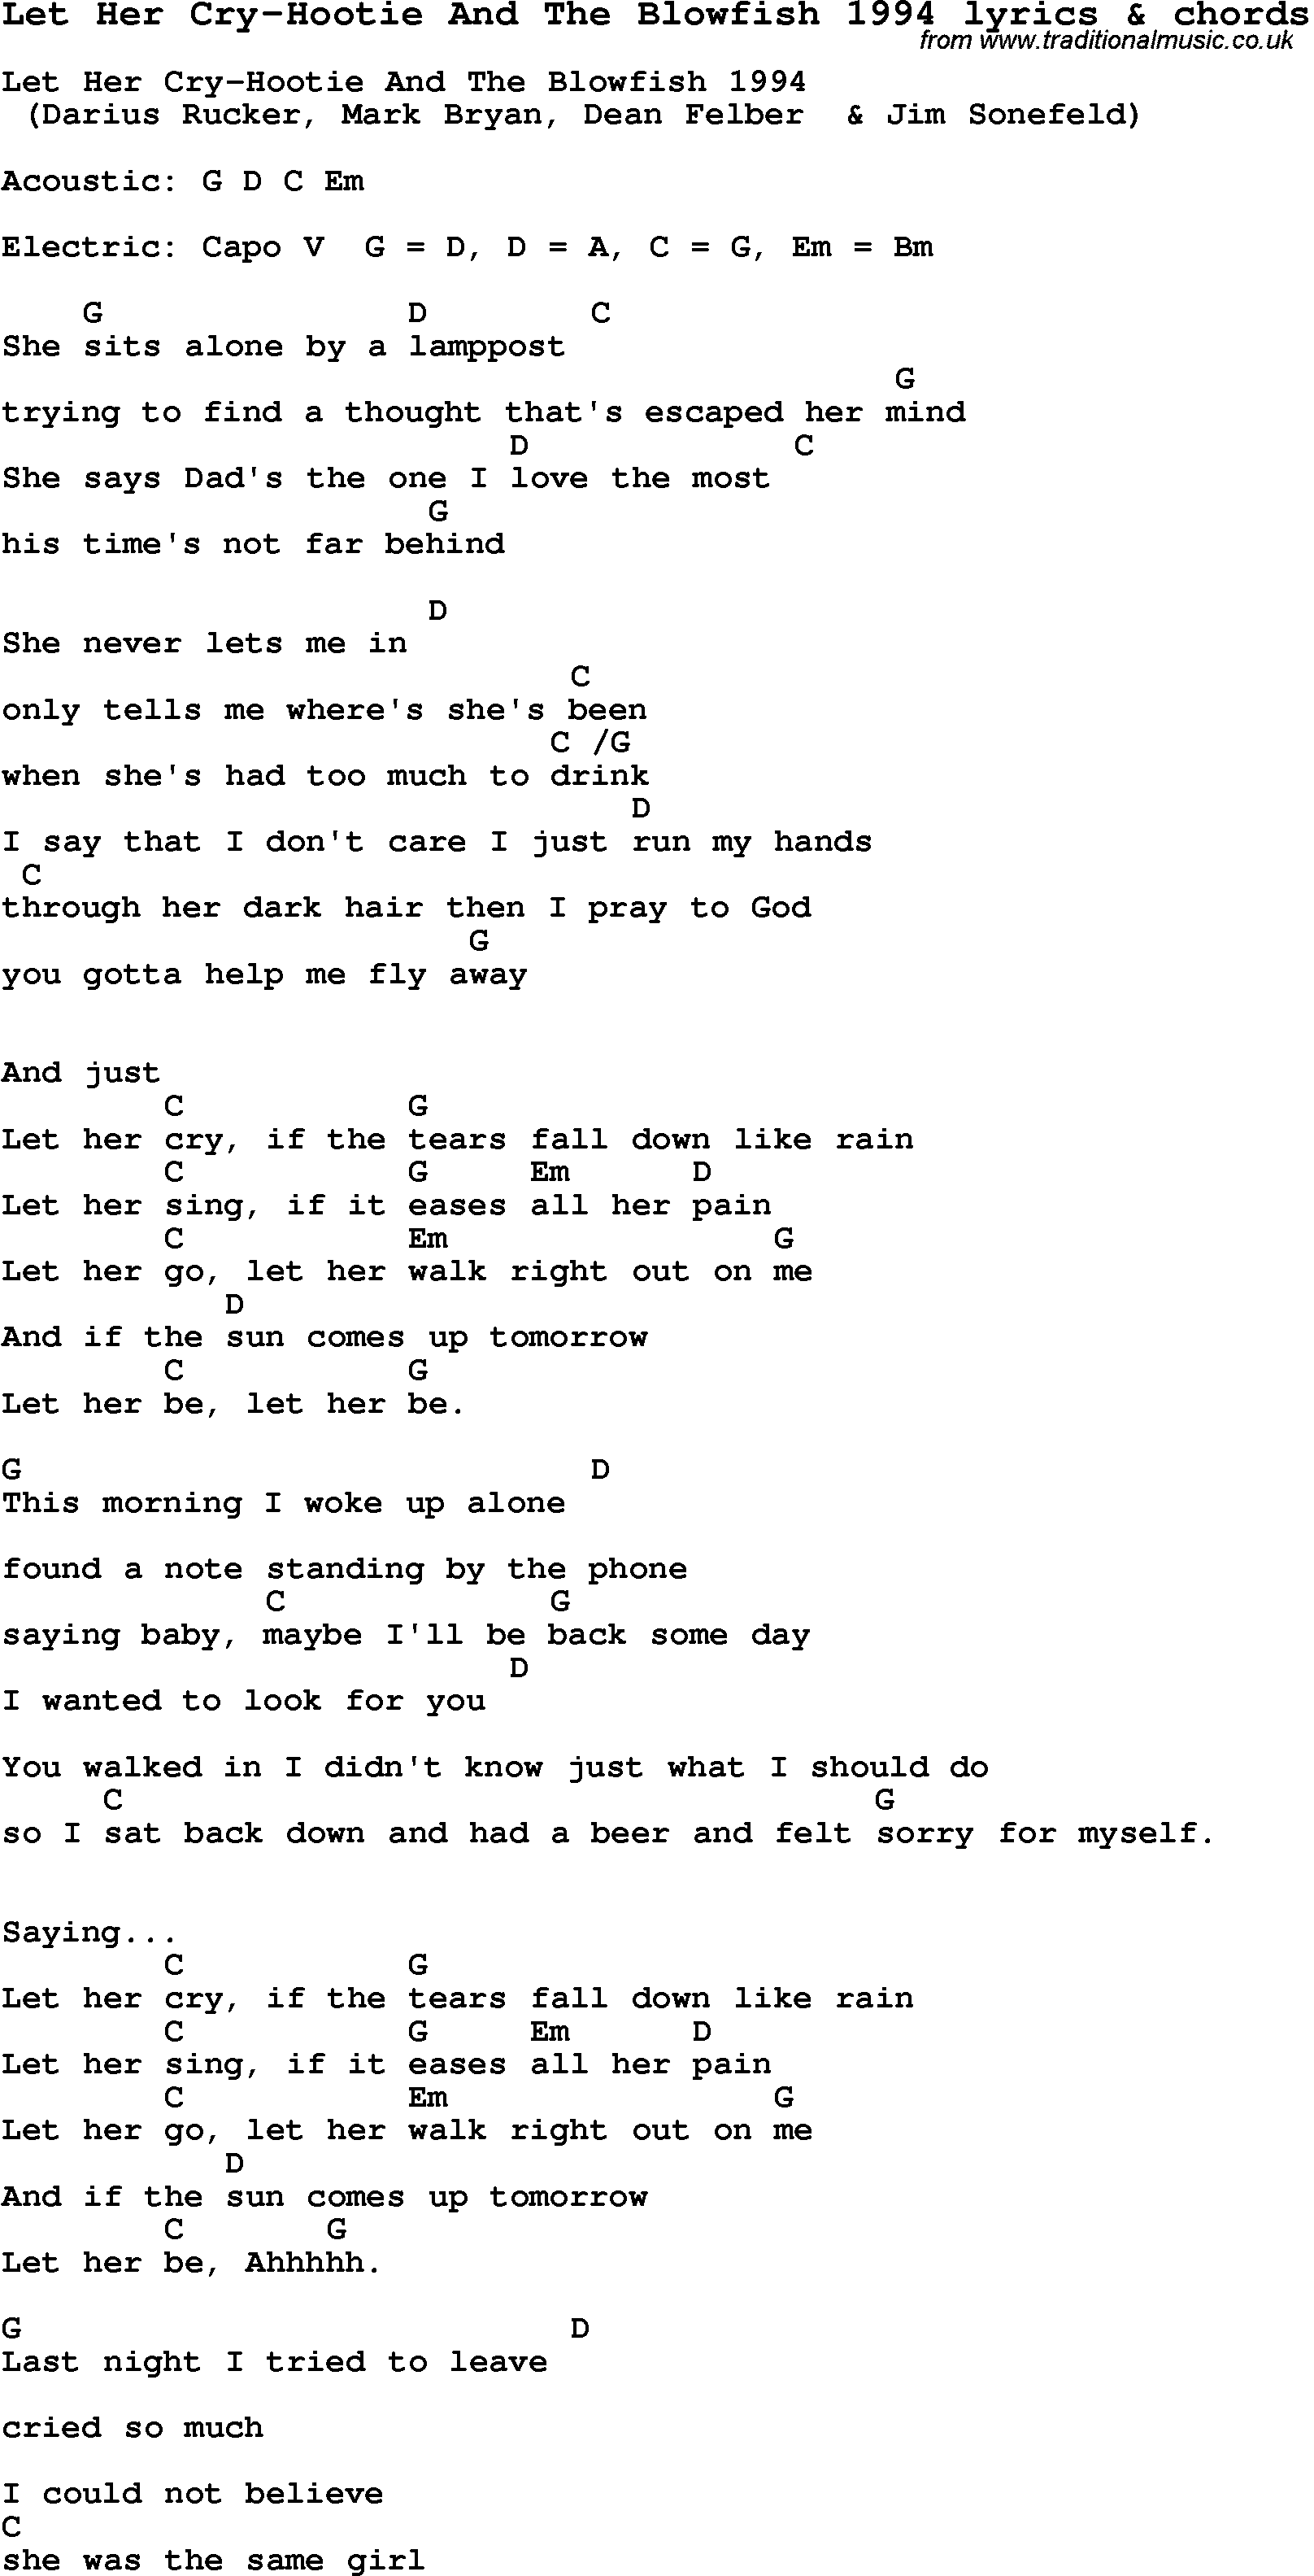 Love Song Lyrics for: Let Her Cry-Hootie And The Blowfish 1994 with chords for Ukulele, Guitar Banjo etc.